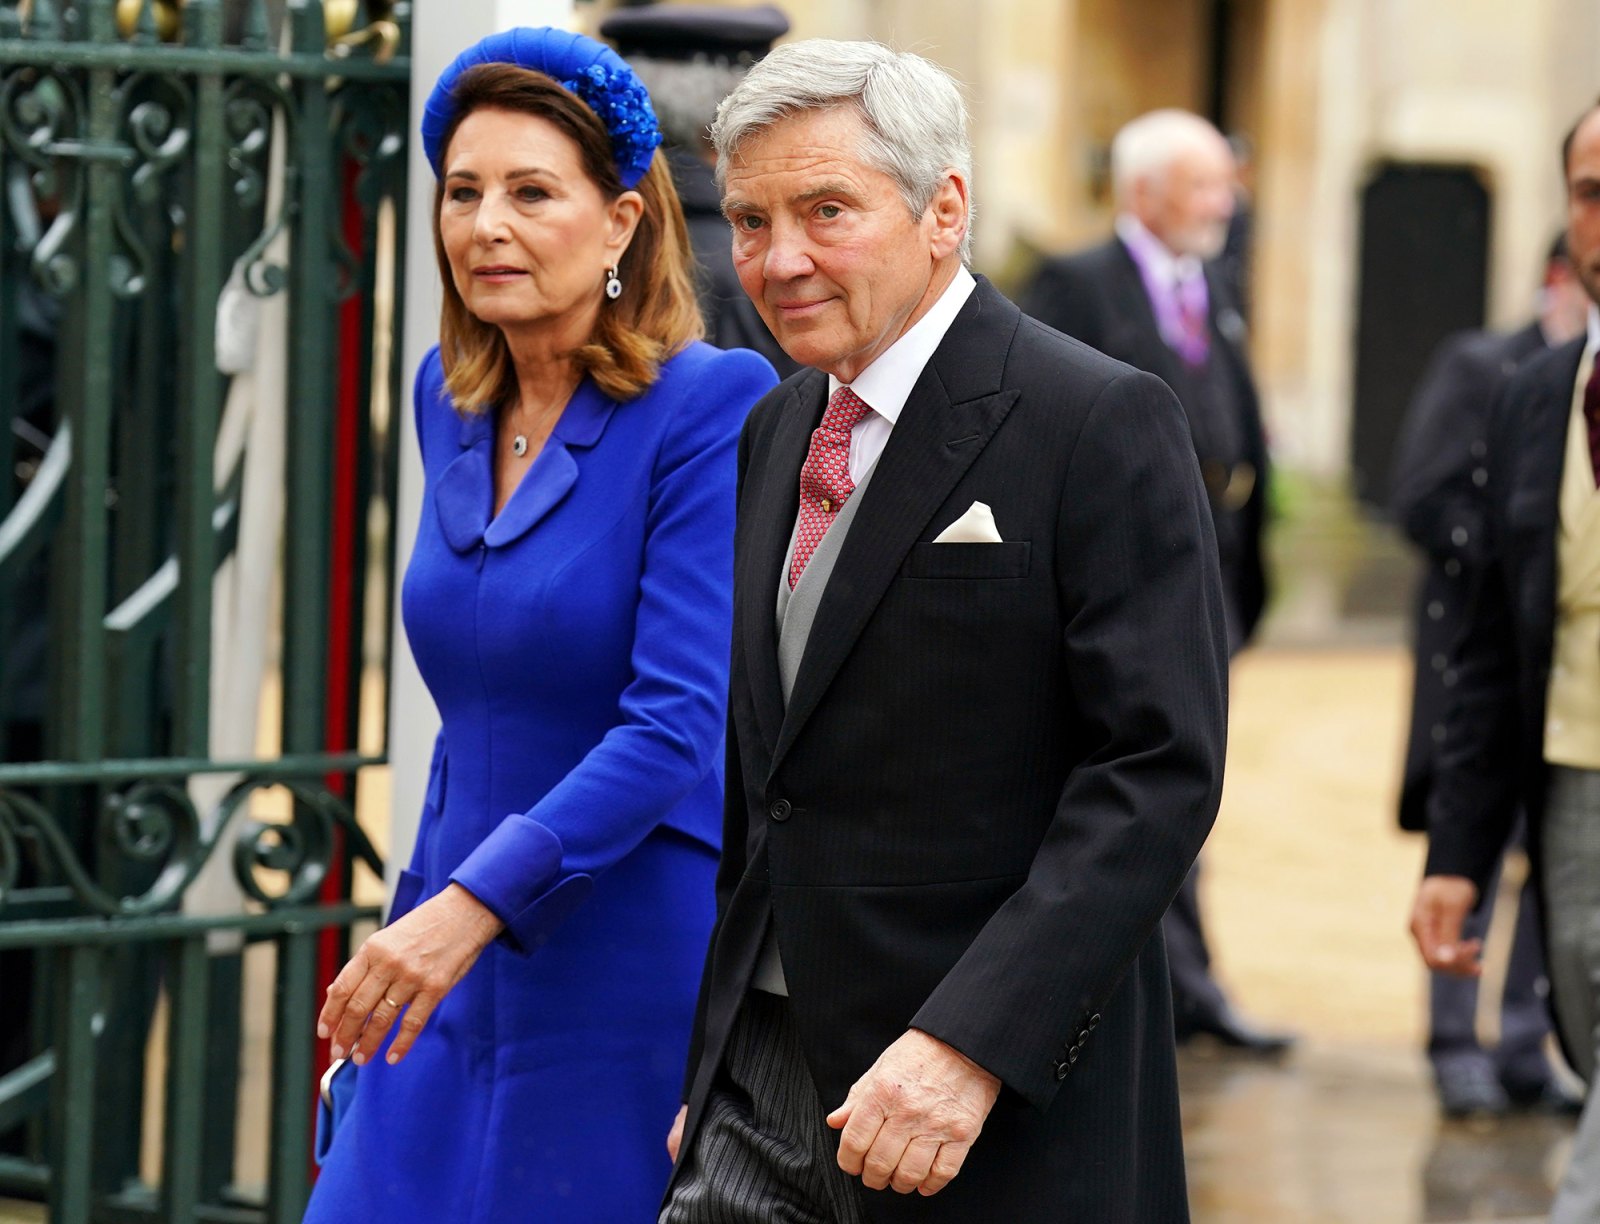 Princess Kate and Pippa Middleton's Parents Carole and Michael Middleton Attend King Charles III's Coronation